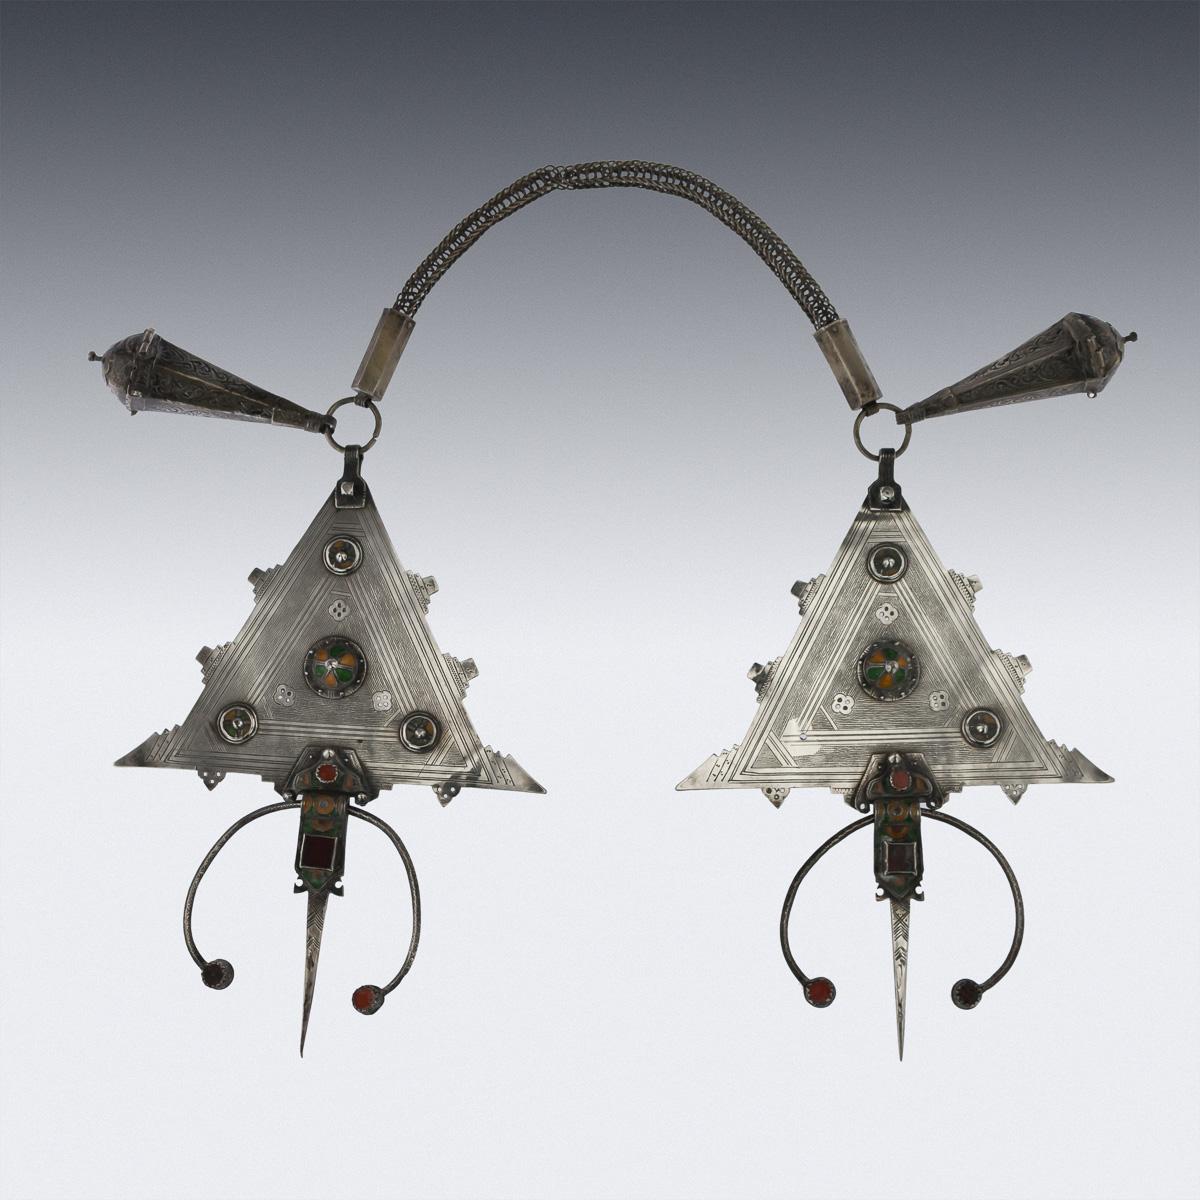 Antique early 20th century rare Moroccan (Tiznit, Atlas mountains) silver and enamel pair of fibulae (Cloak Fasteners), in the form of shaped triangles, tooled and applied with cloisonné enamel plates, the woven wire-work belt terminating with two